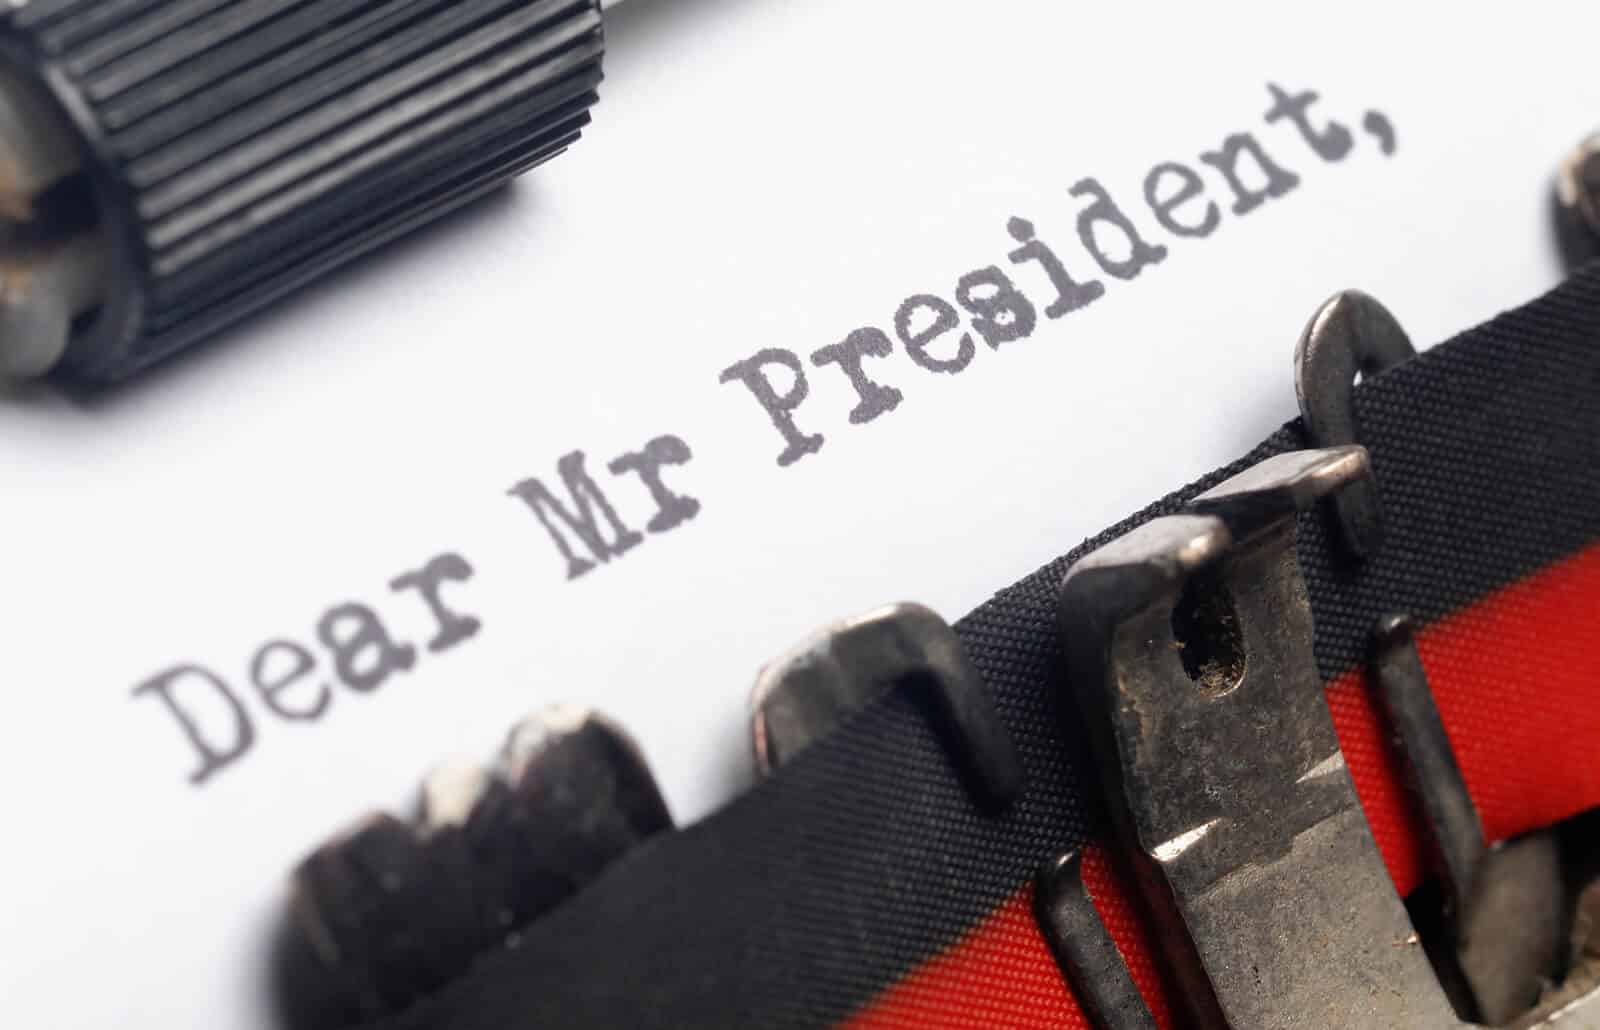 How To Write a Letter To The President